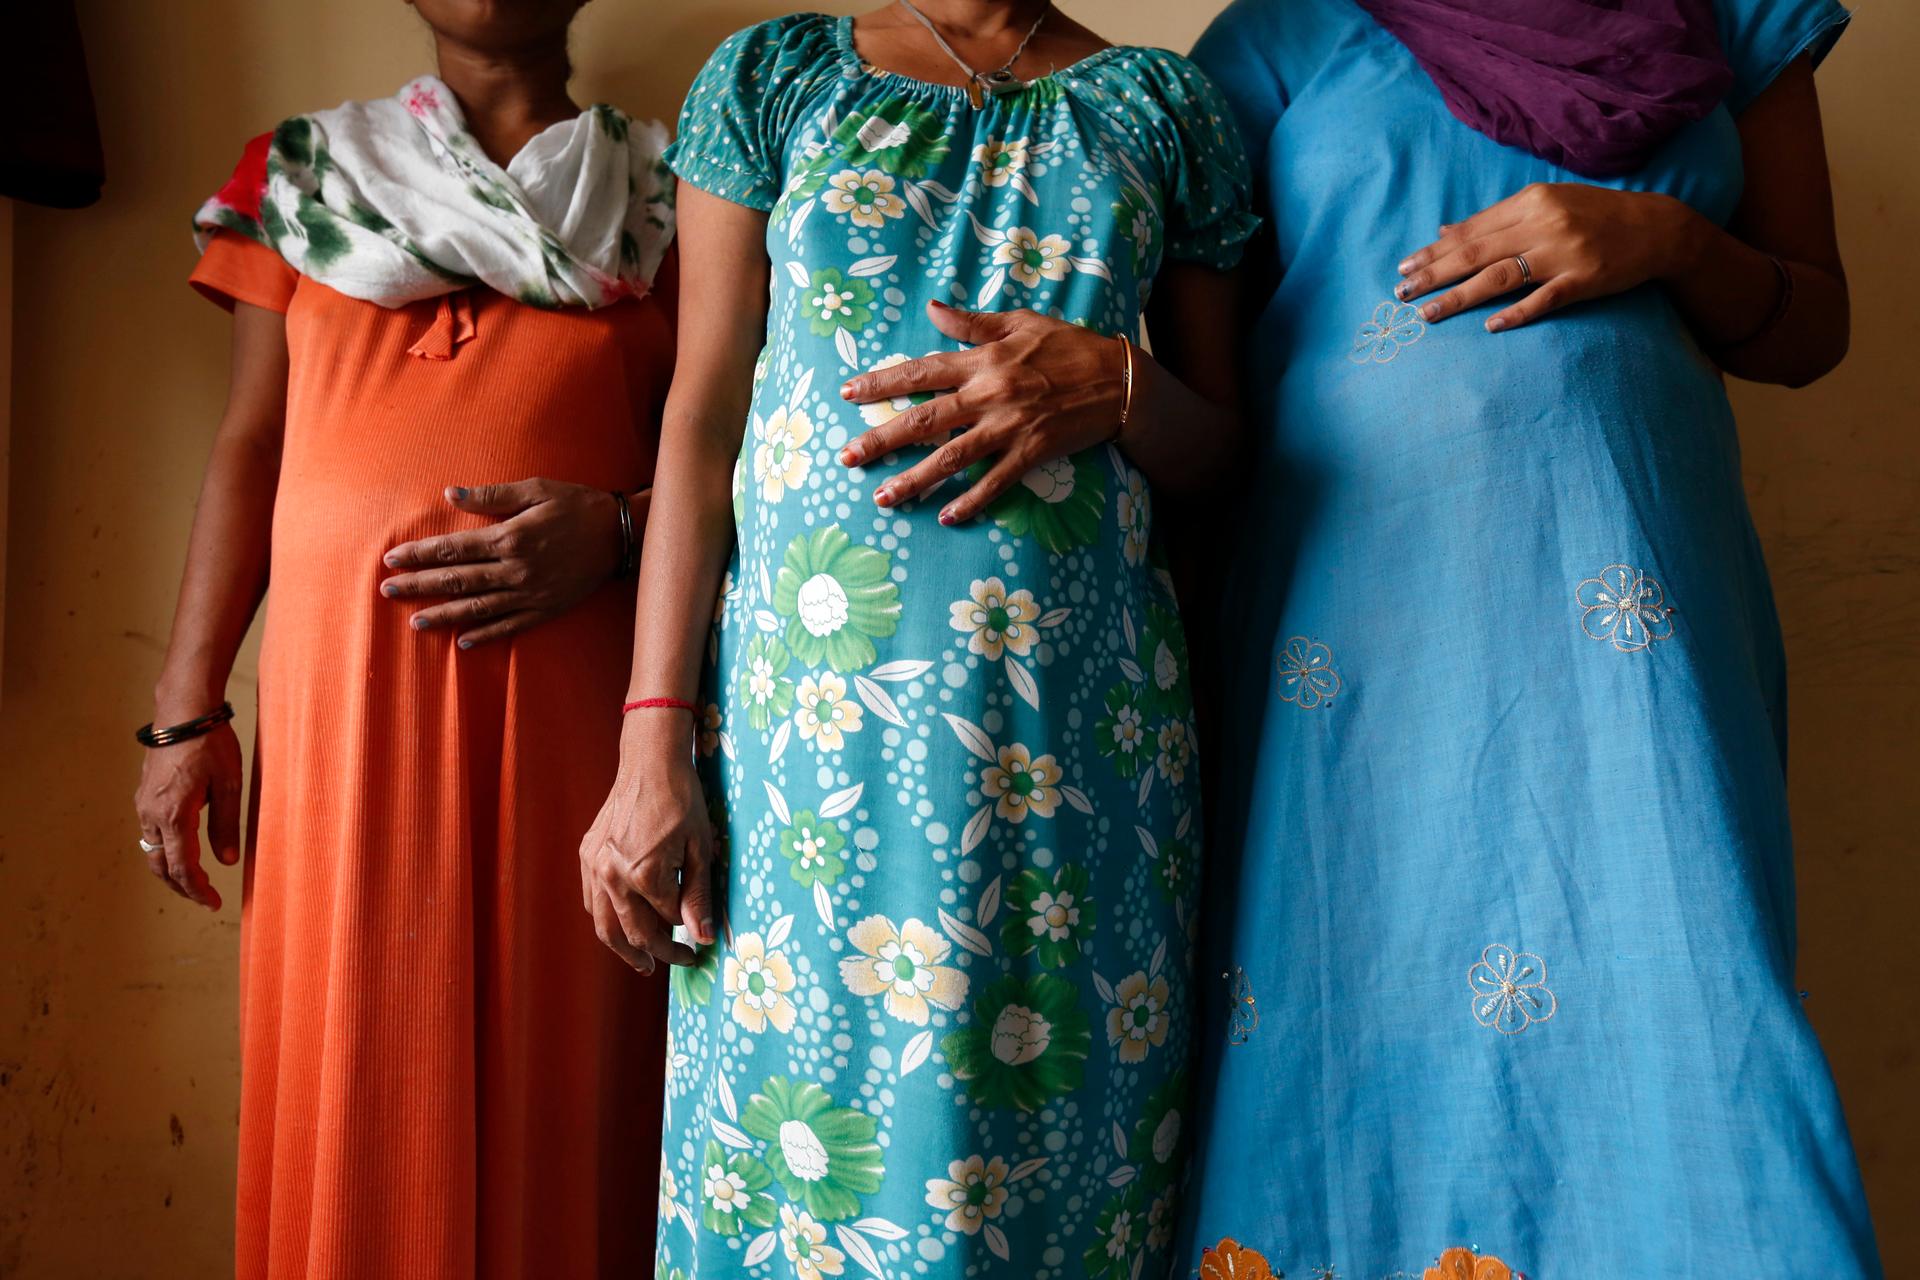 Surrogate mothers Daksha, 37, Renuka, 23, and Rajia, 39, left to right, pose for a photograph inside a temporary home for surrogates provided by Akanksha IVF centre in Anand town August 27, 2013.